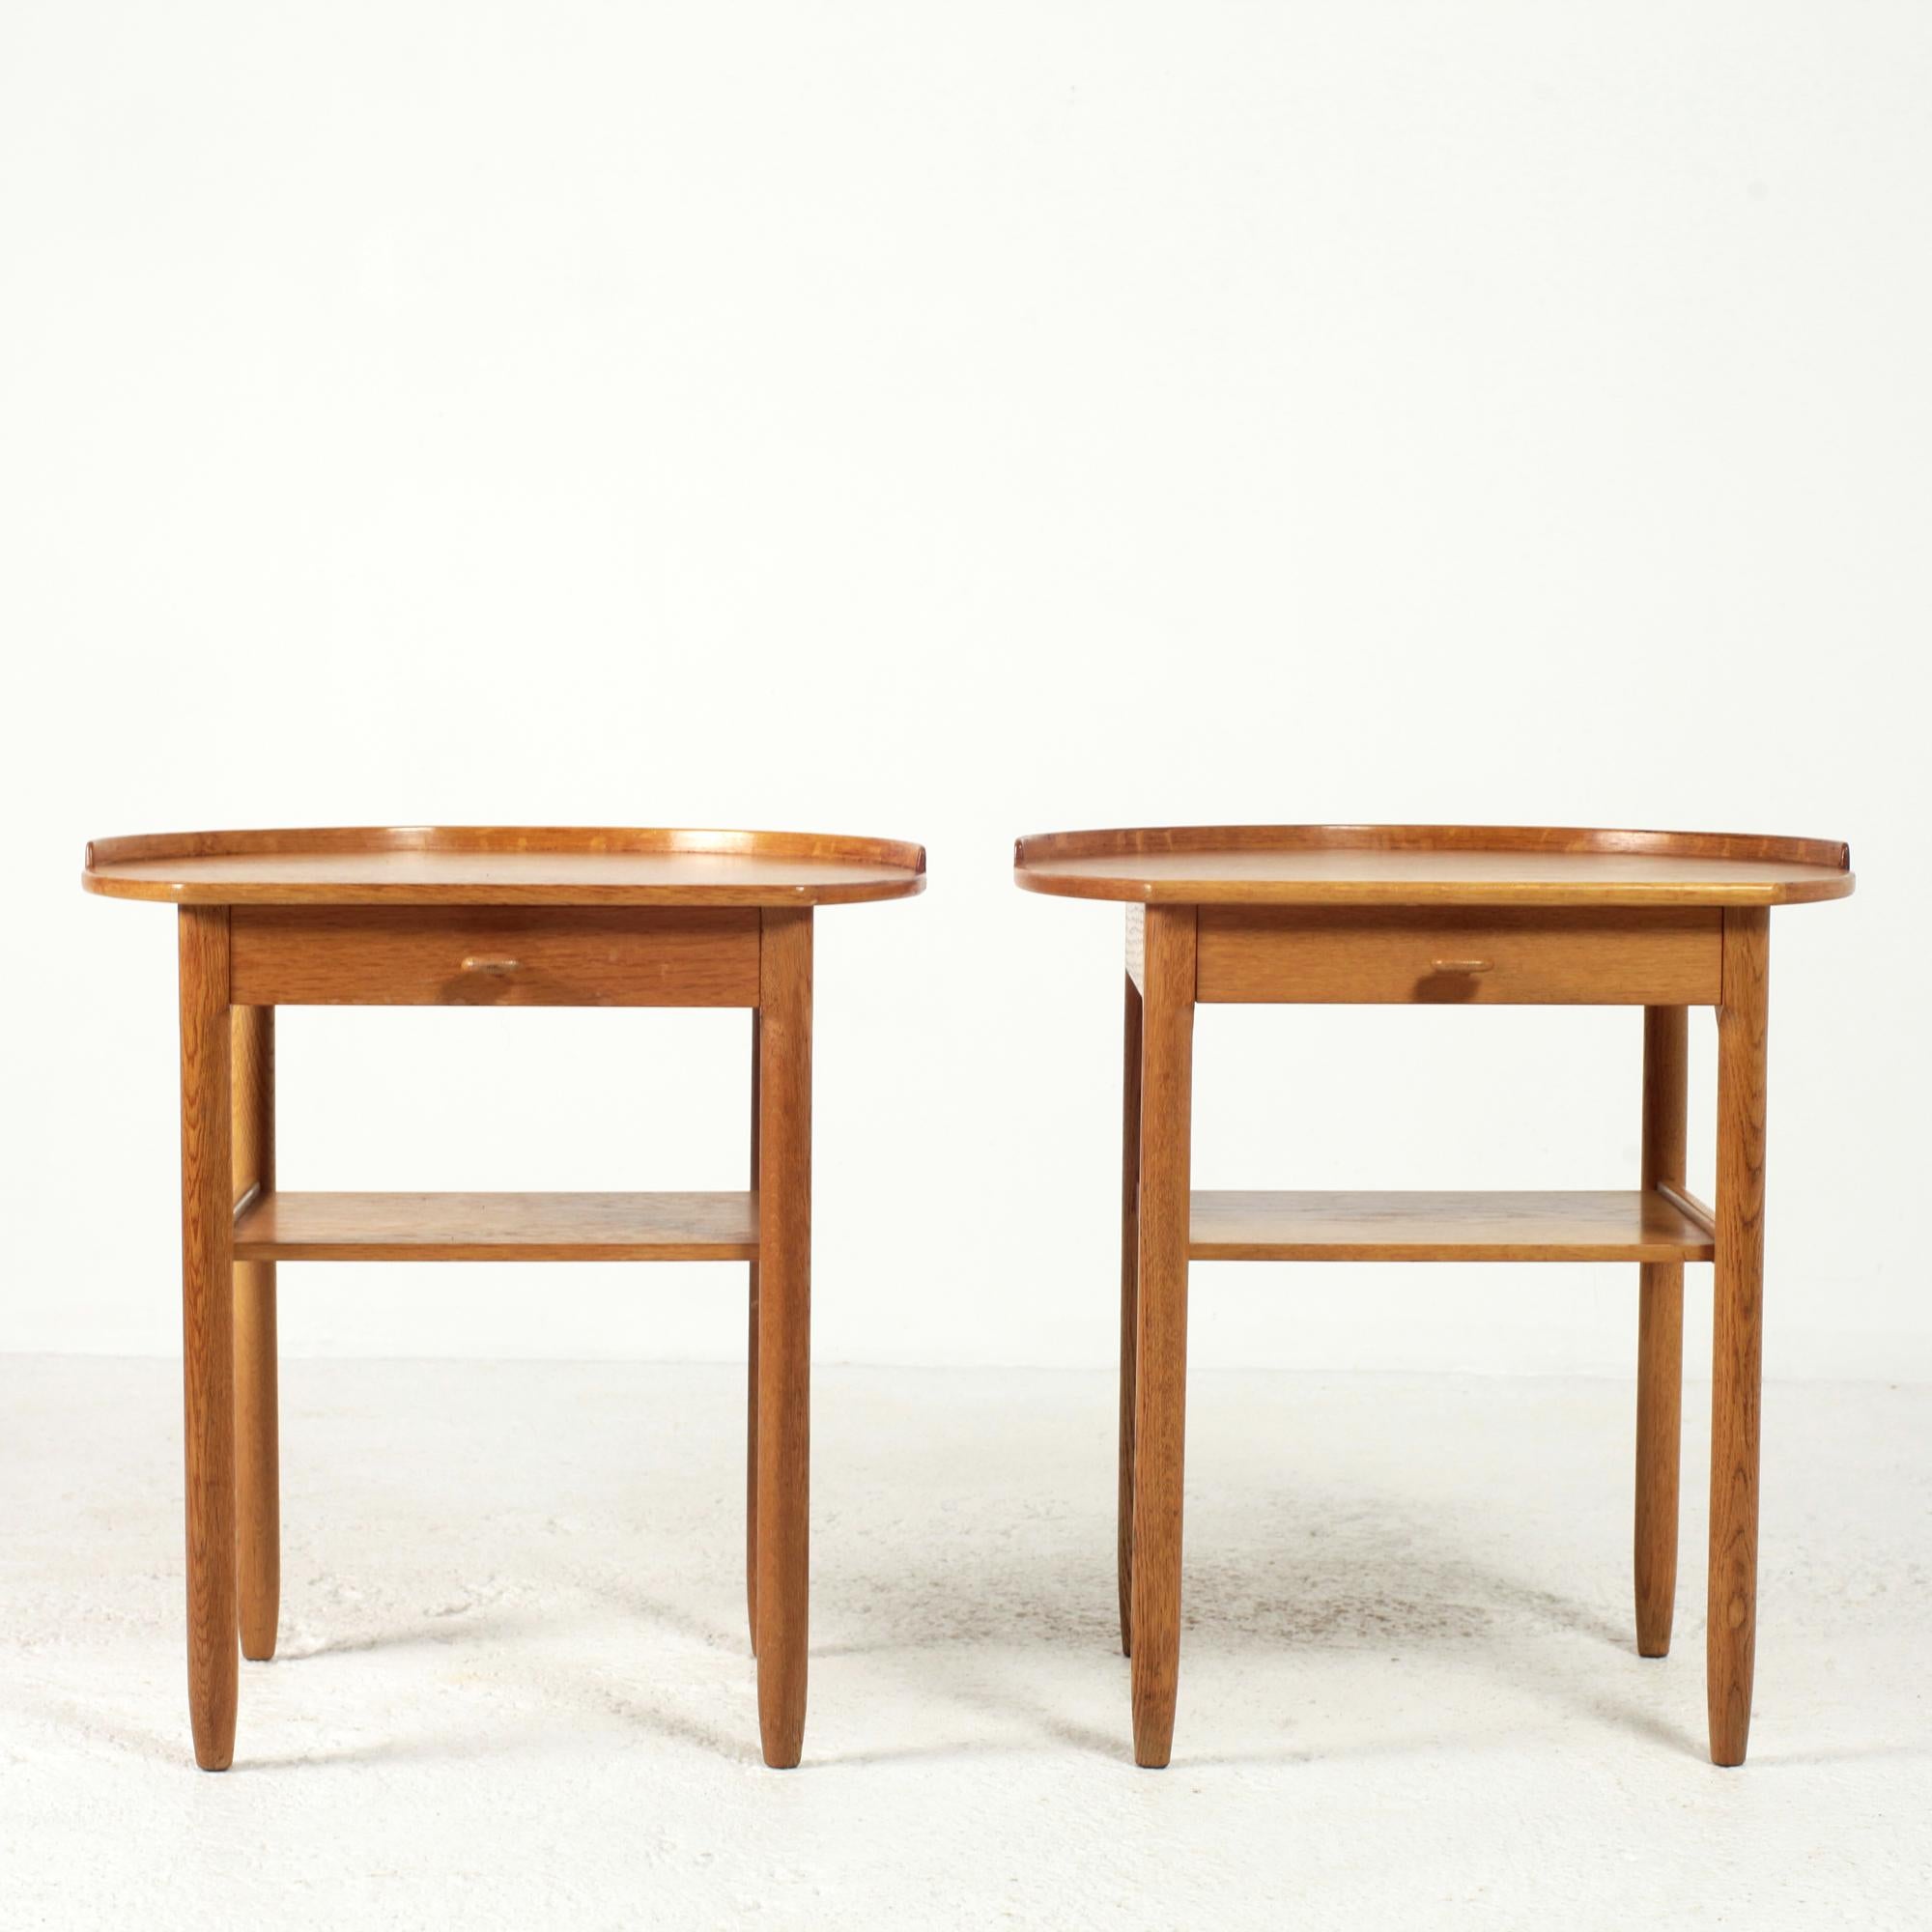 Rare pair of oak bedside tables designed in the sixties by Sven Engström and Gunnar Myrstrand for Bodafors Sweden.
Elegant rounded design with nice details like sculpted drawer handles and a rim around half the table tops.
Stamped.